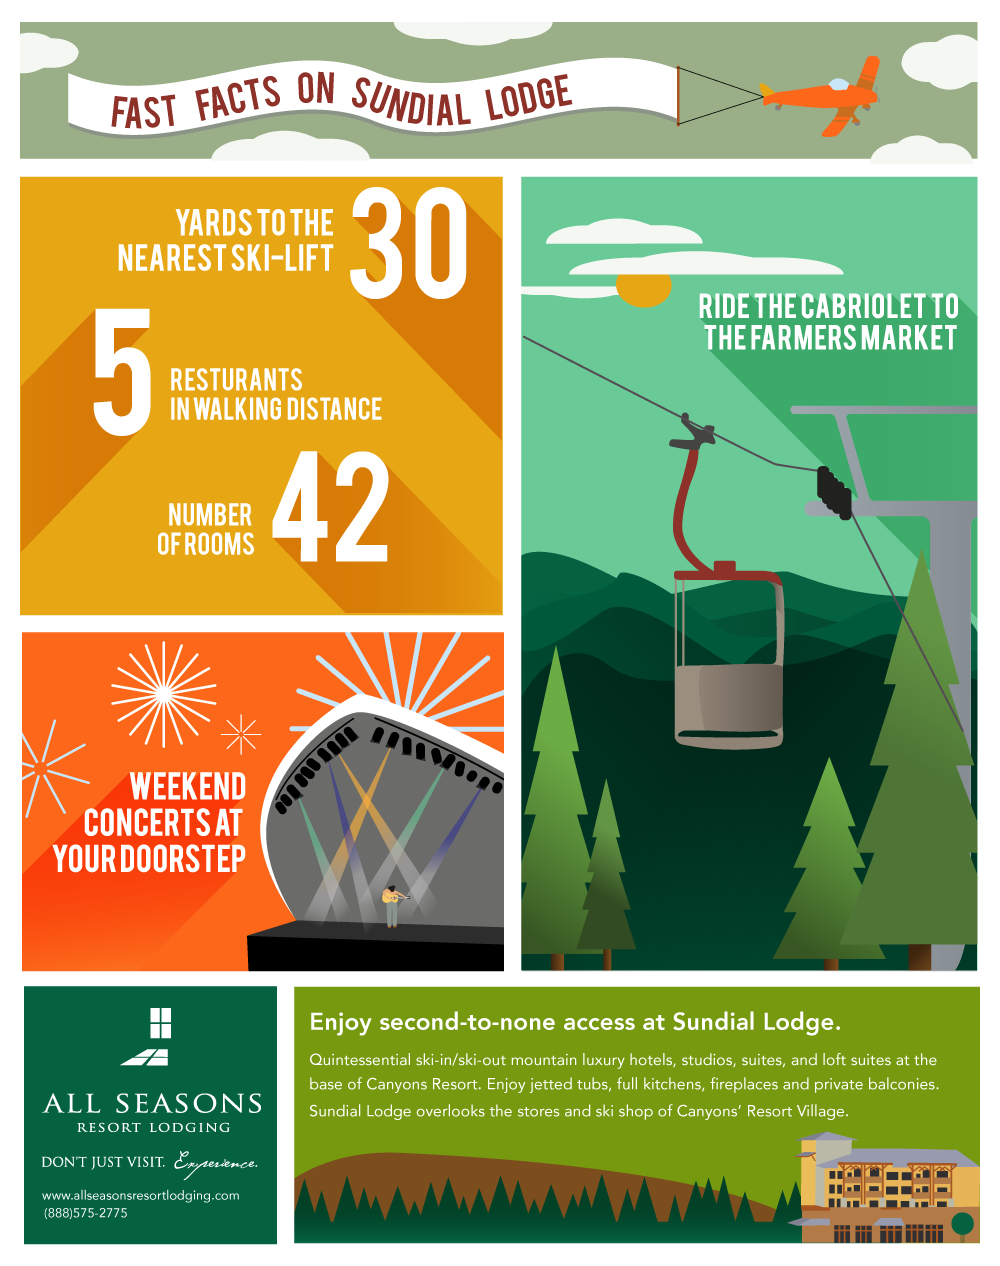 Fast Facts Graphic of Sundial Lodge